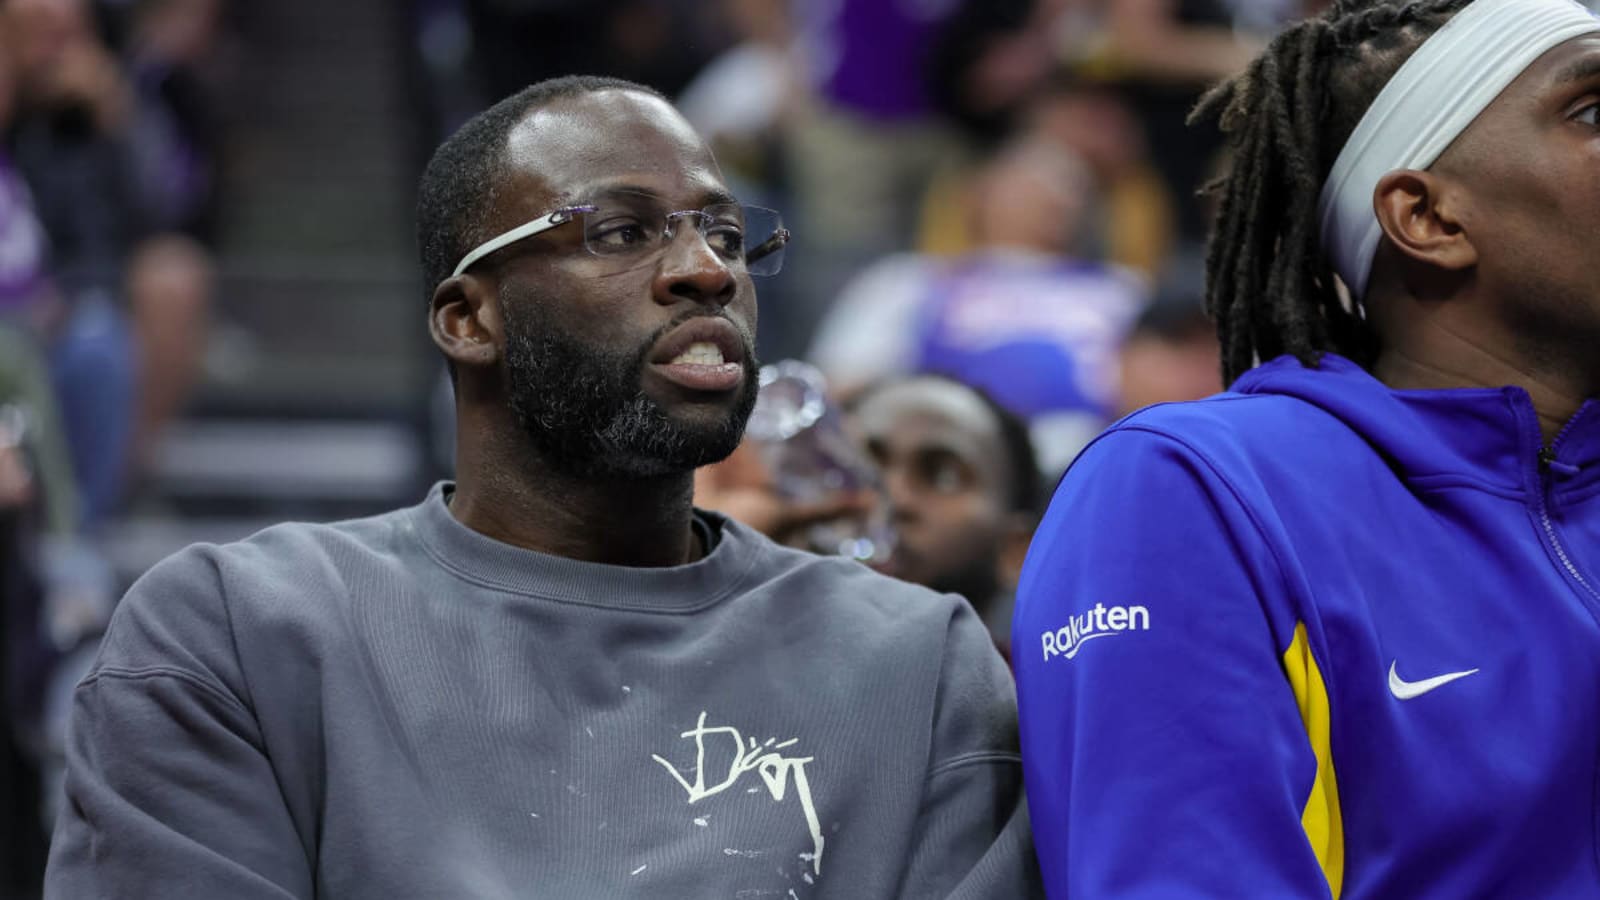 Details of Draymond Green’s Message to Teammates Revealed